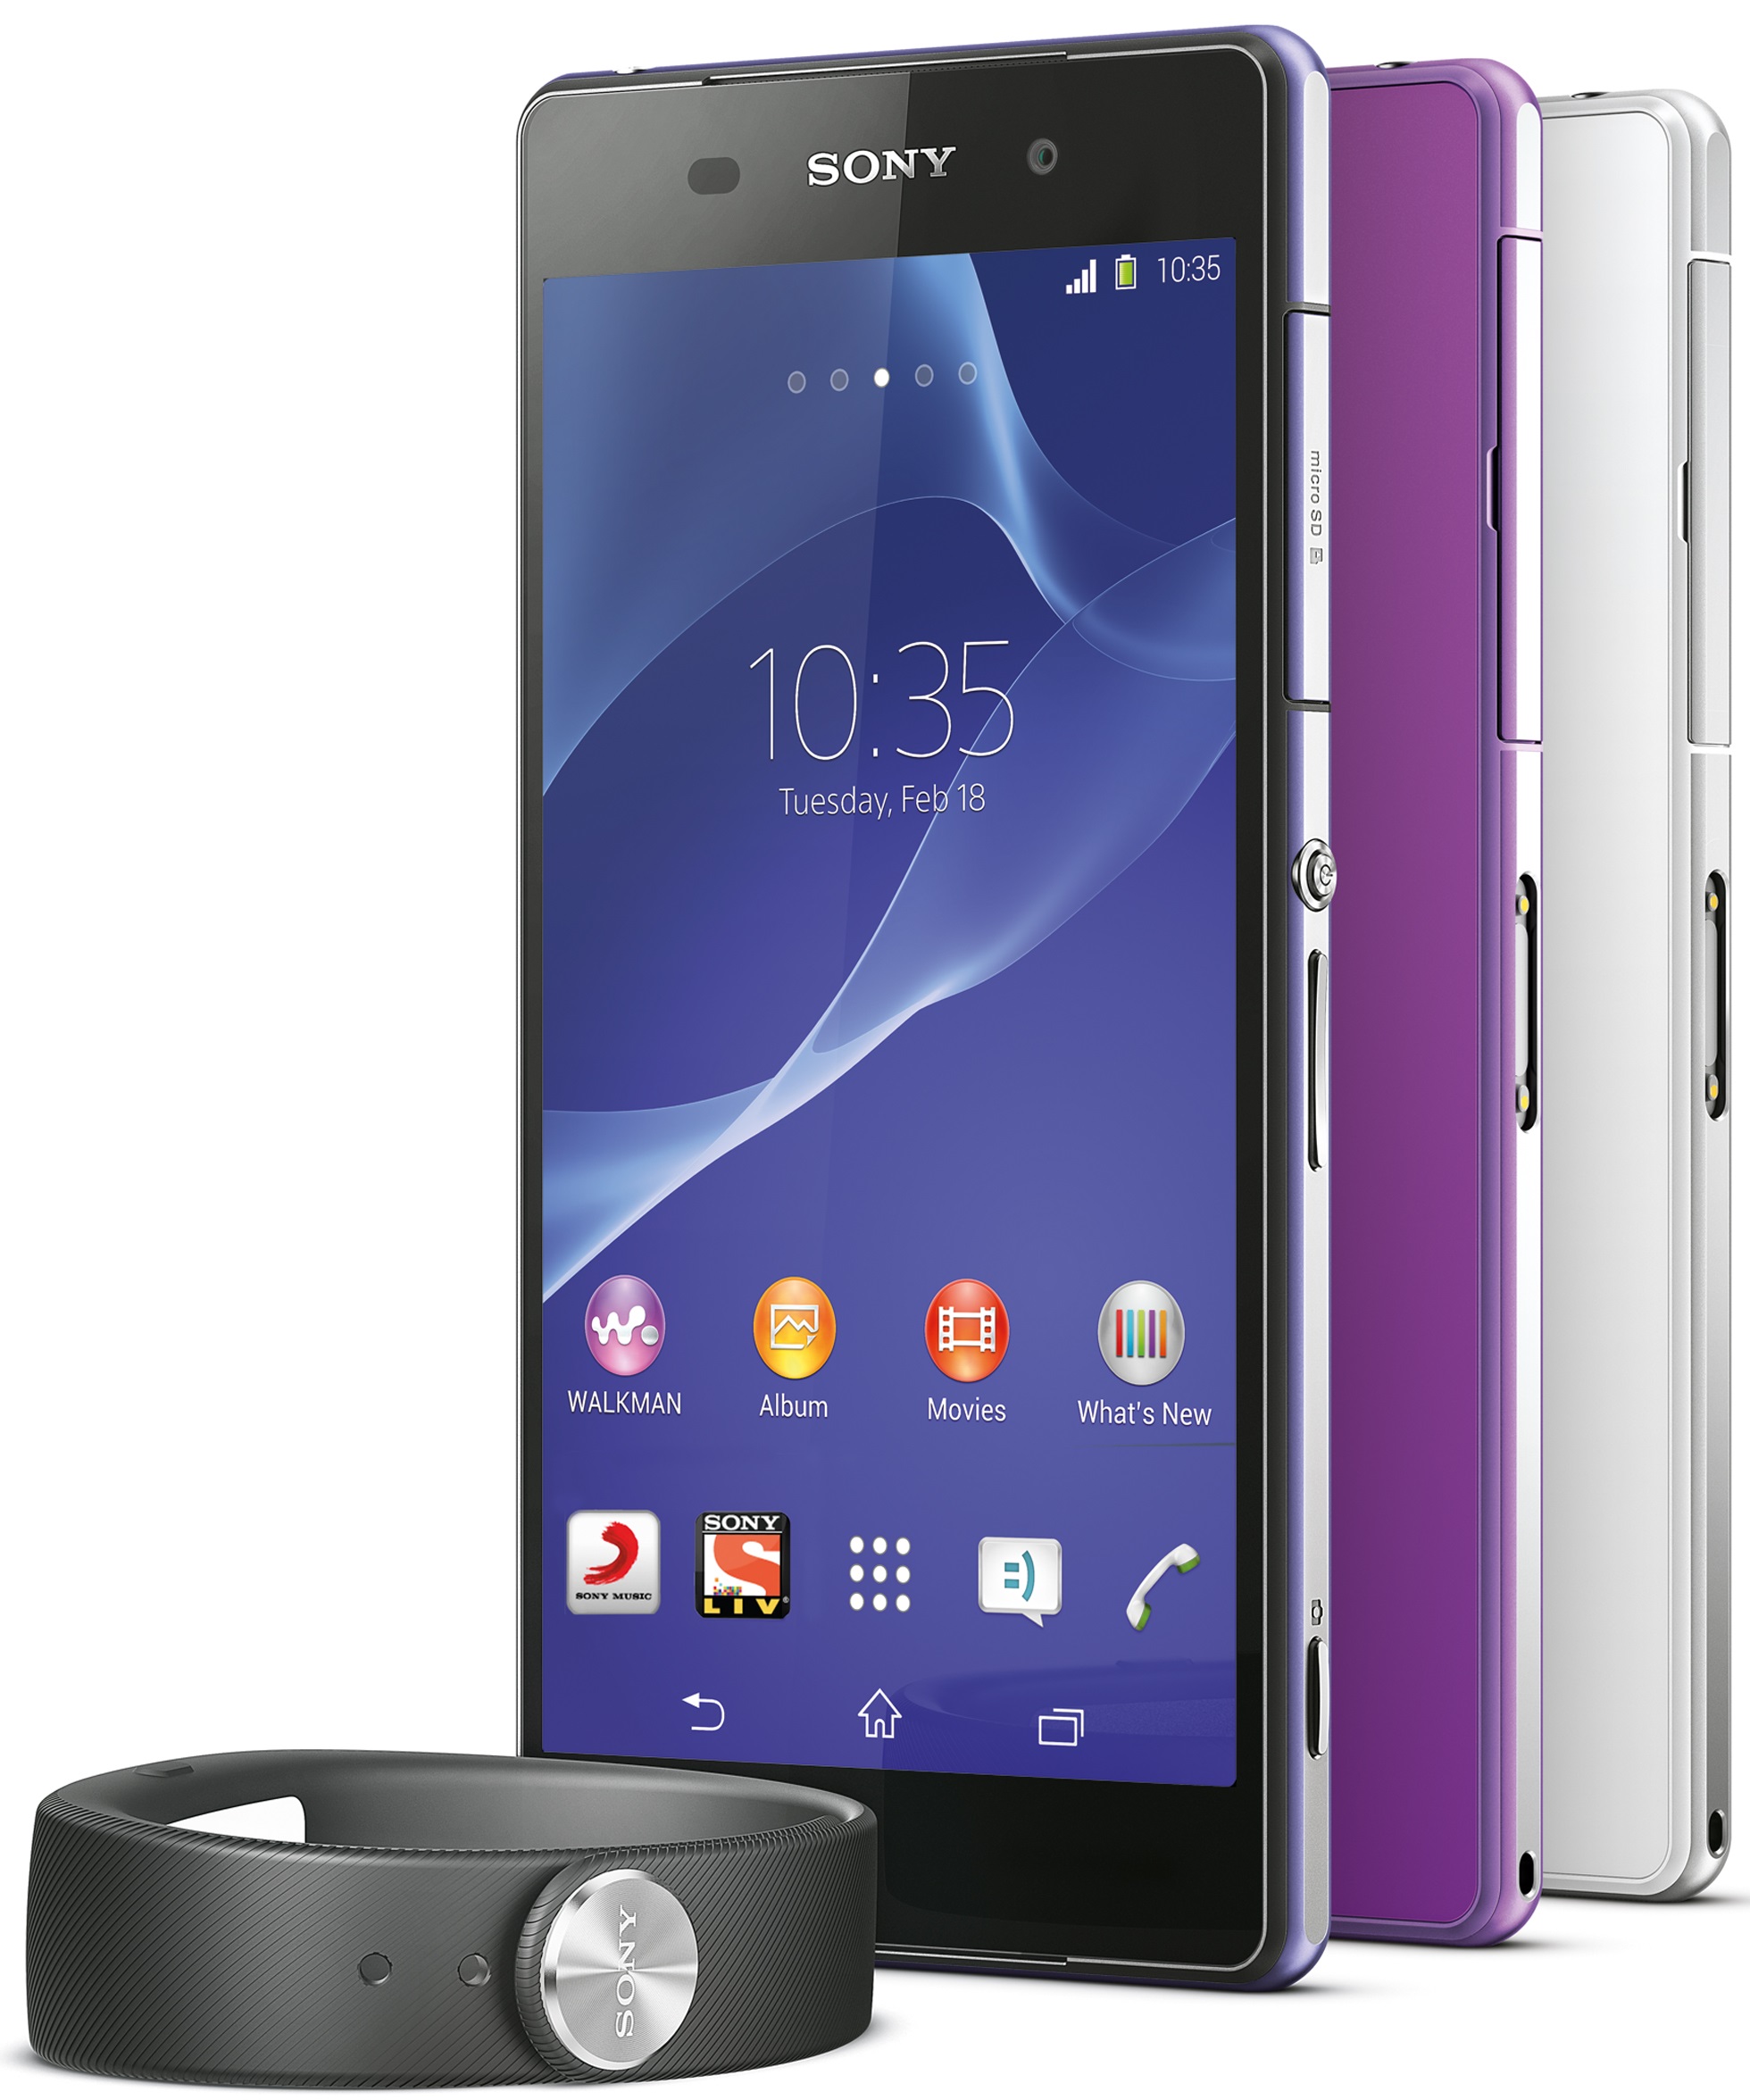 SmartBand SWR10 free with Xperia Z2 in India